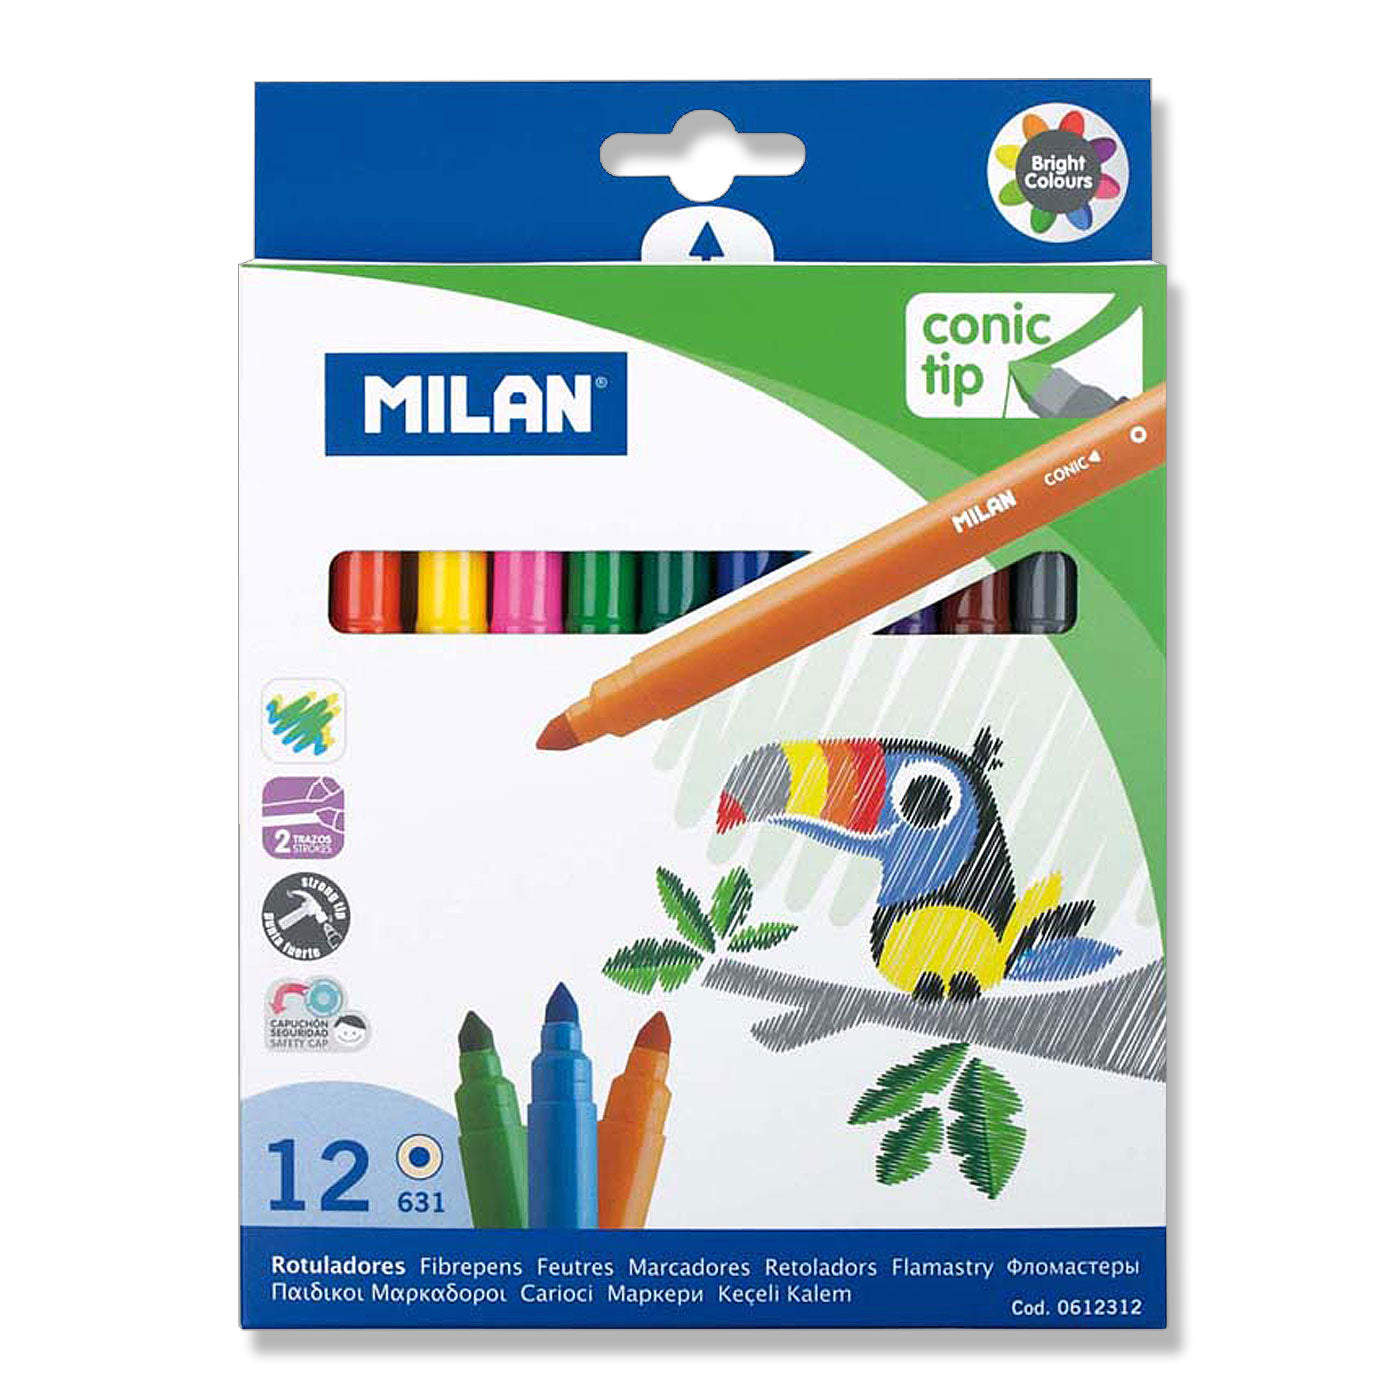 Milan Fibre Tip Markers Conic Tip 5mm Pack of 12 Assorted Colours